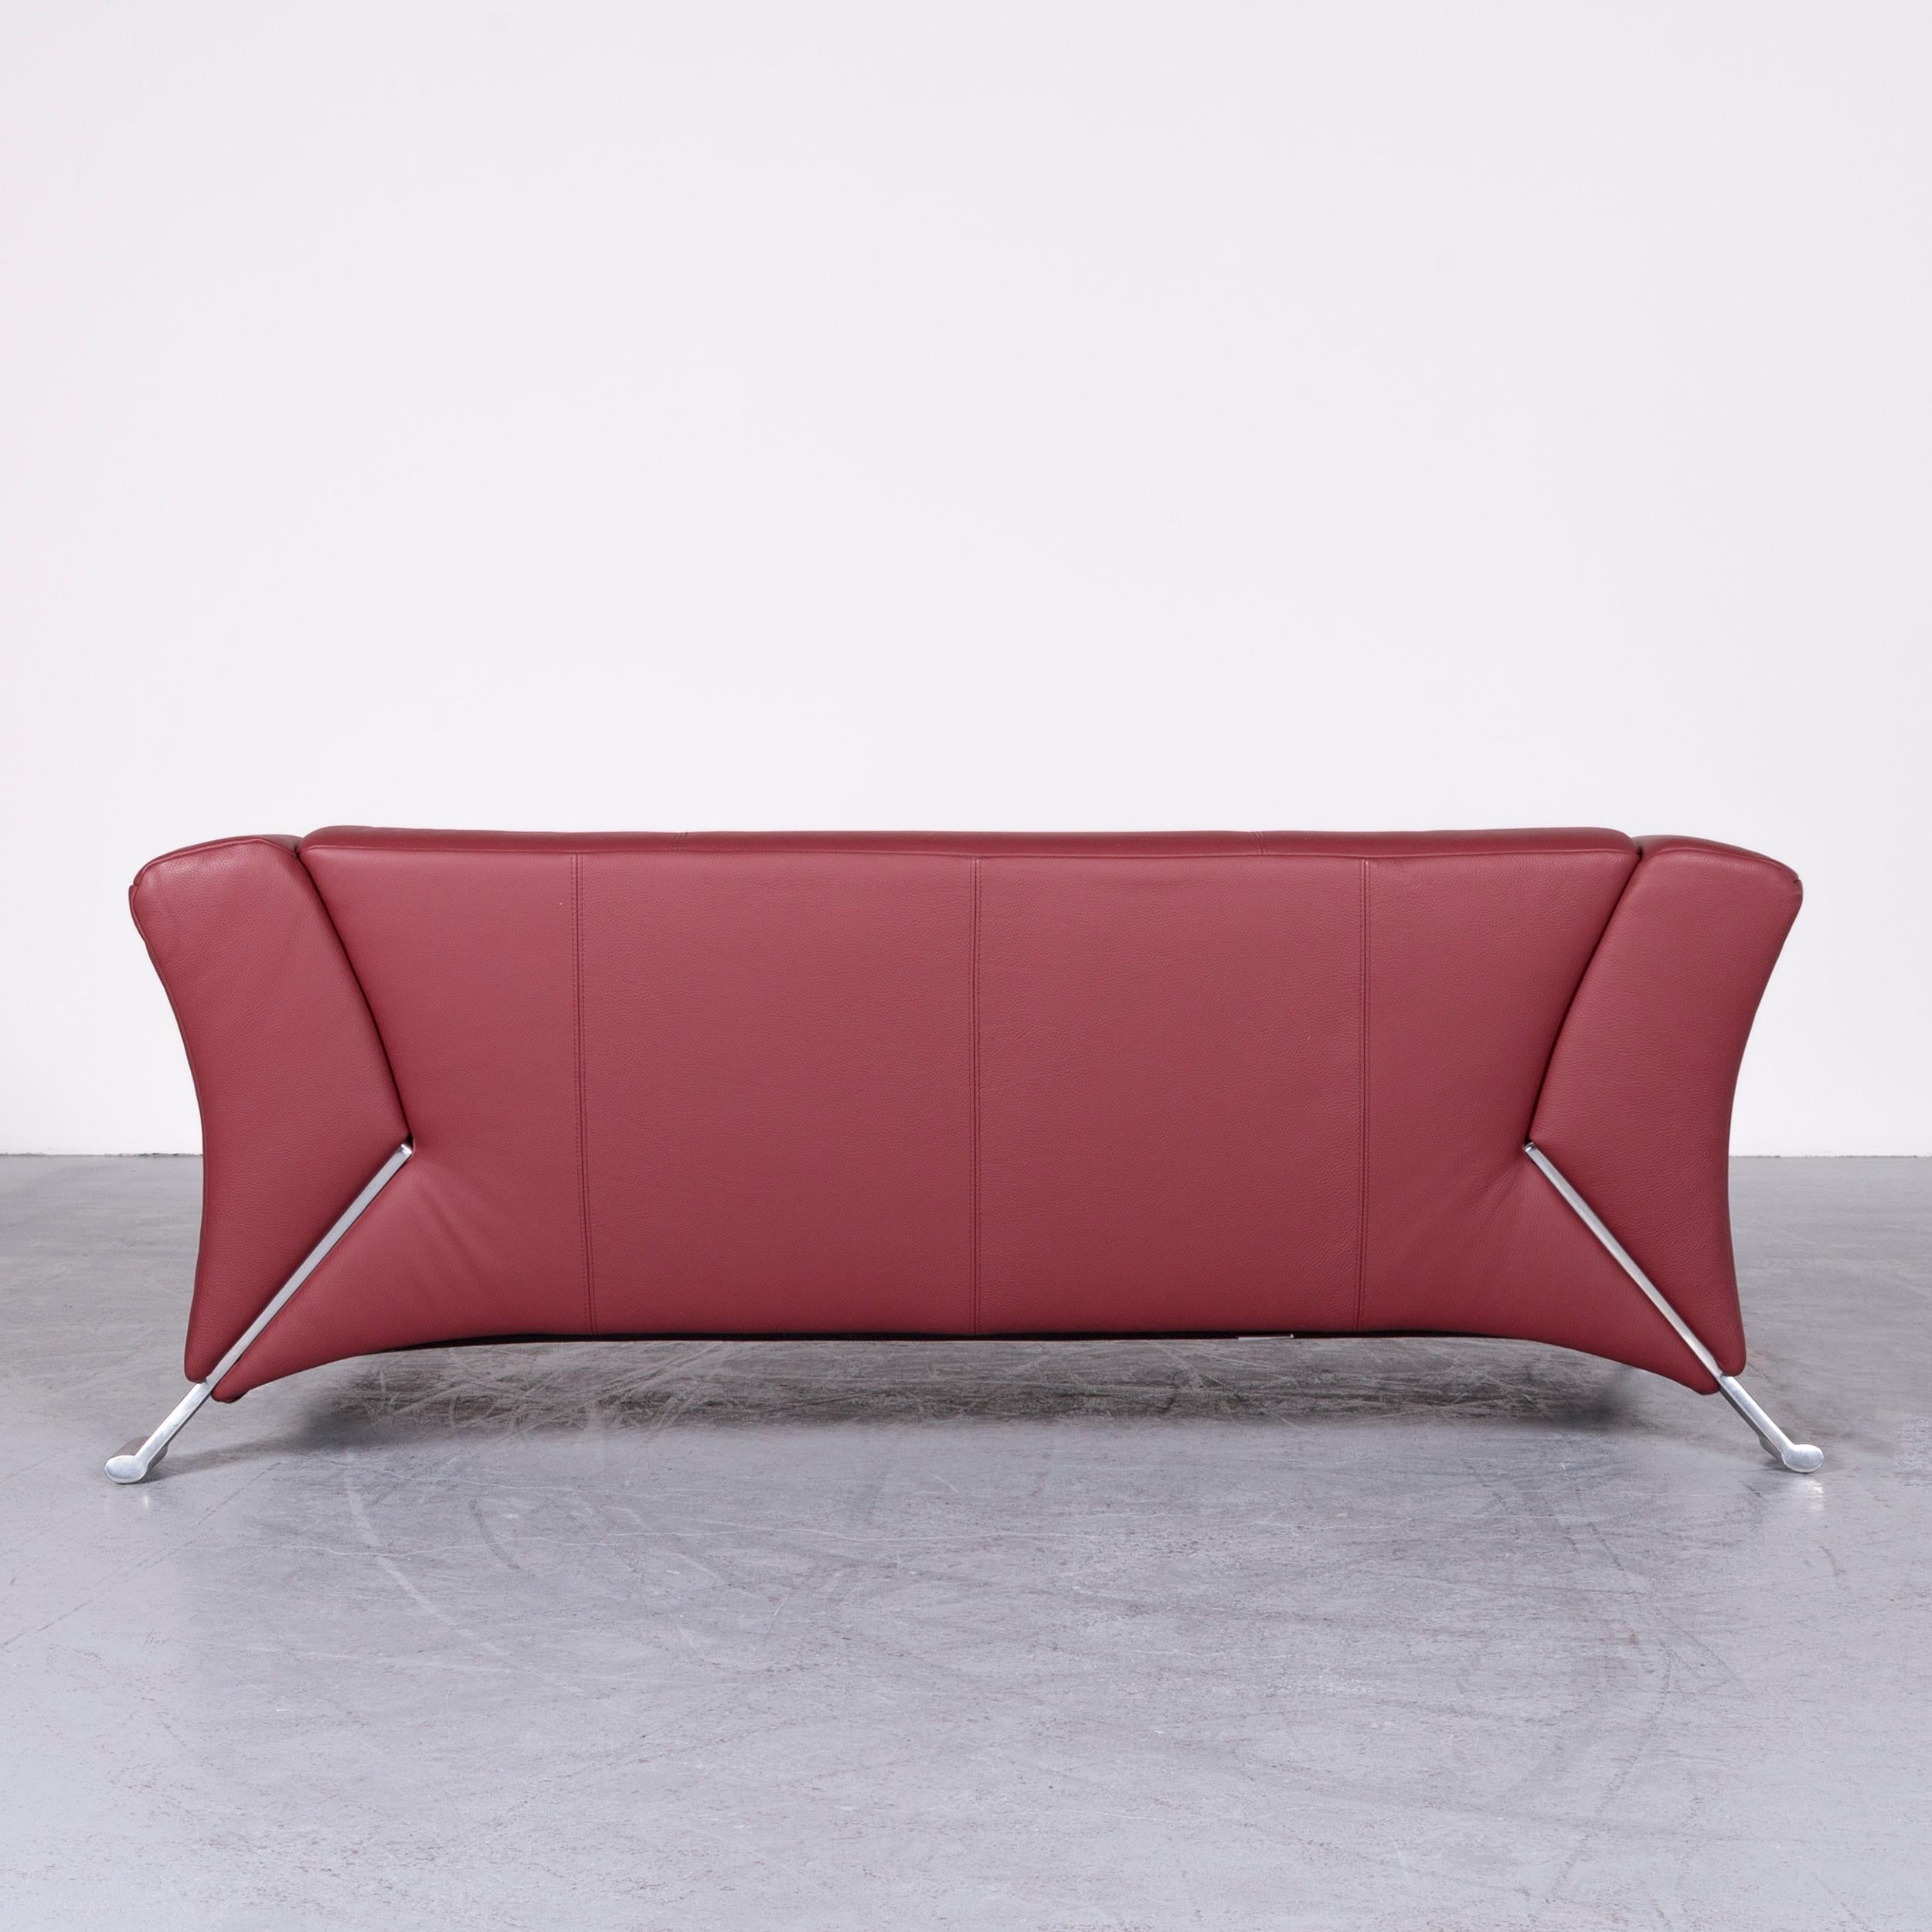 Rolf Benz 322 Designer Sofa Red Two-Seat Leather Couch 1